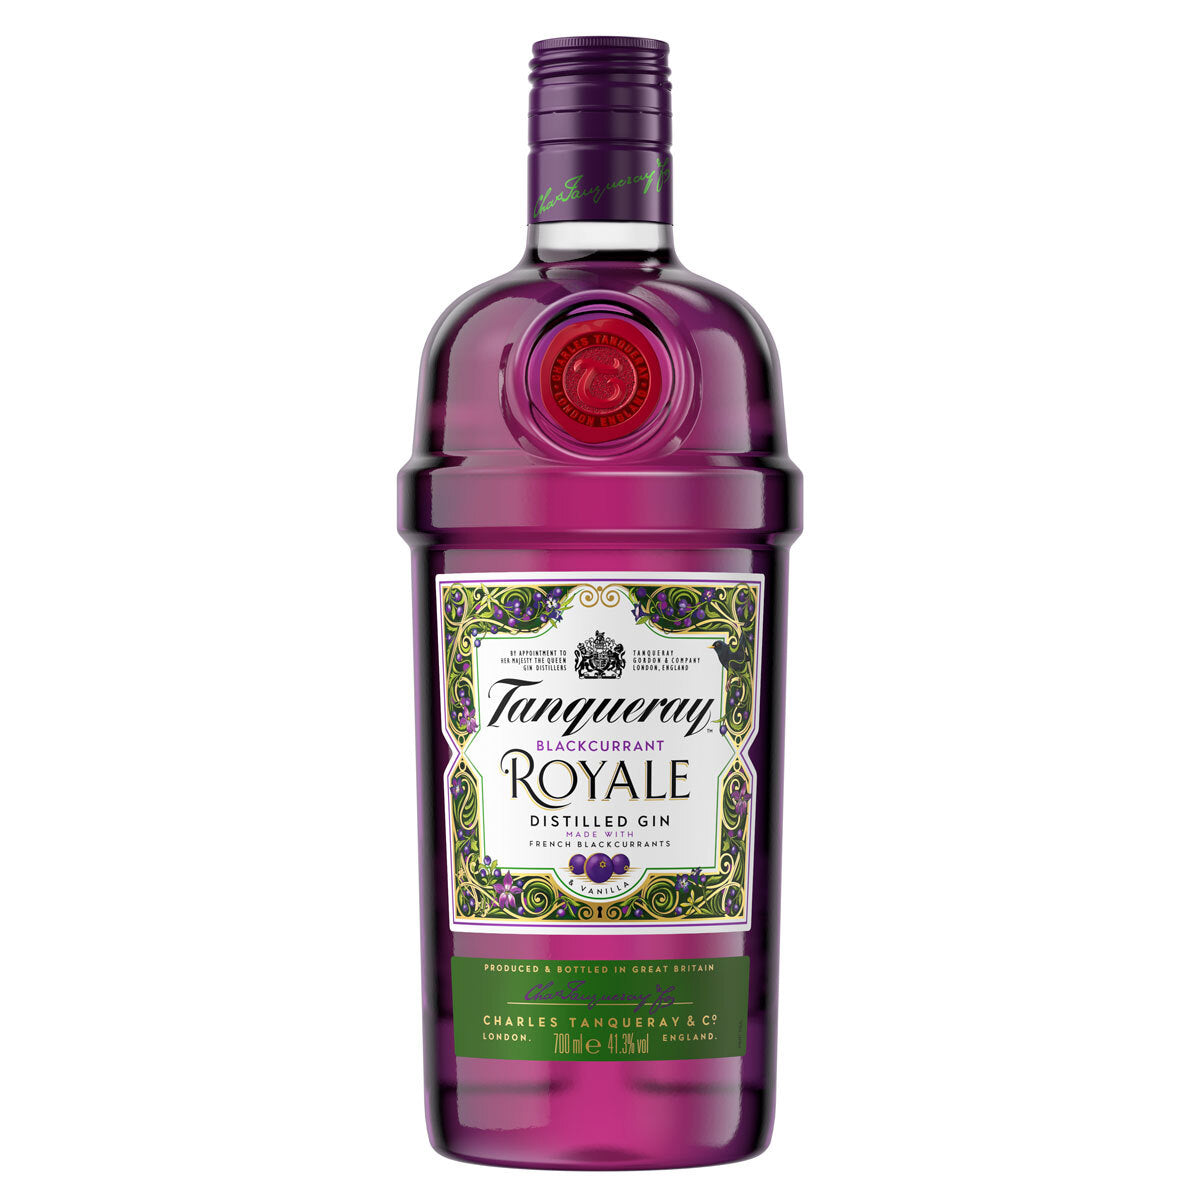 Tanqueray Blackcurrant Royale Gin 70cl - McGrocer